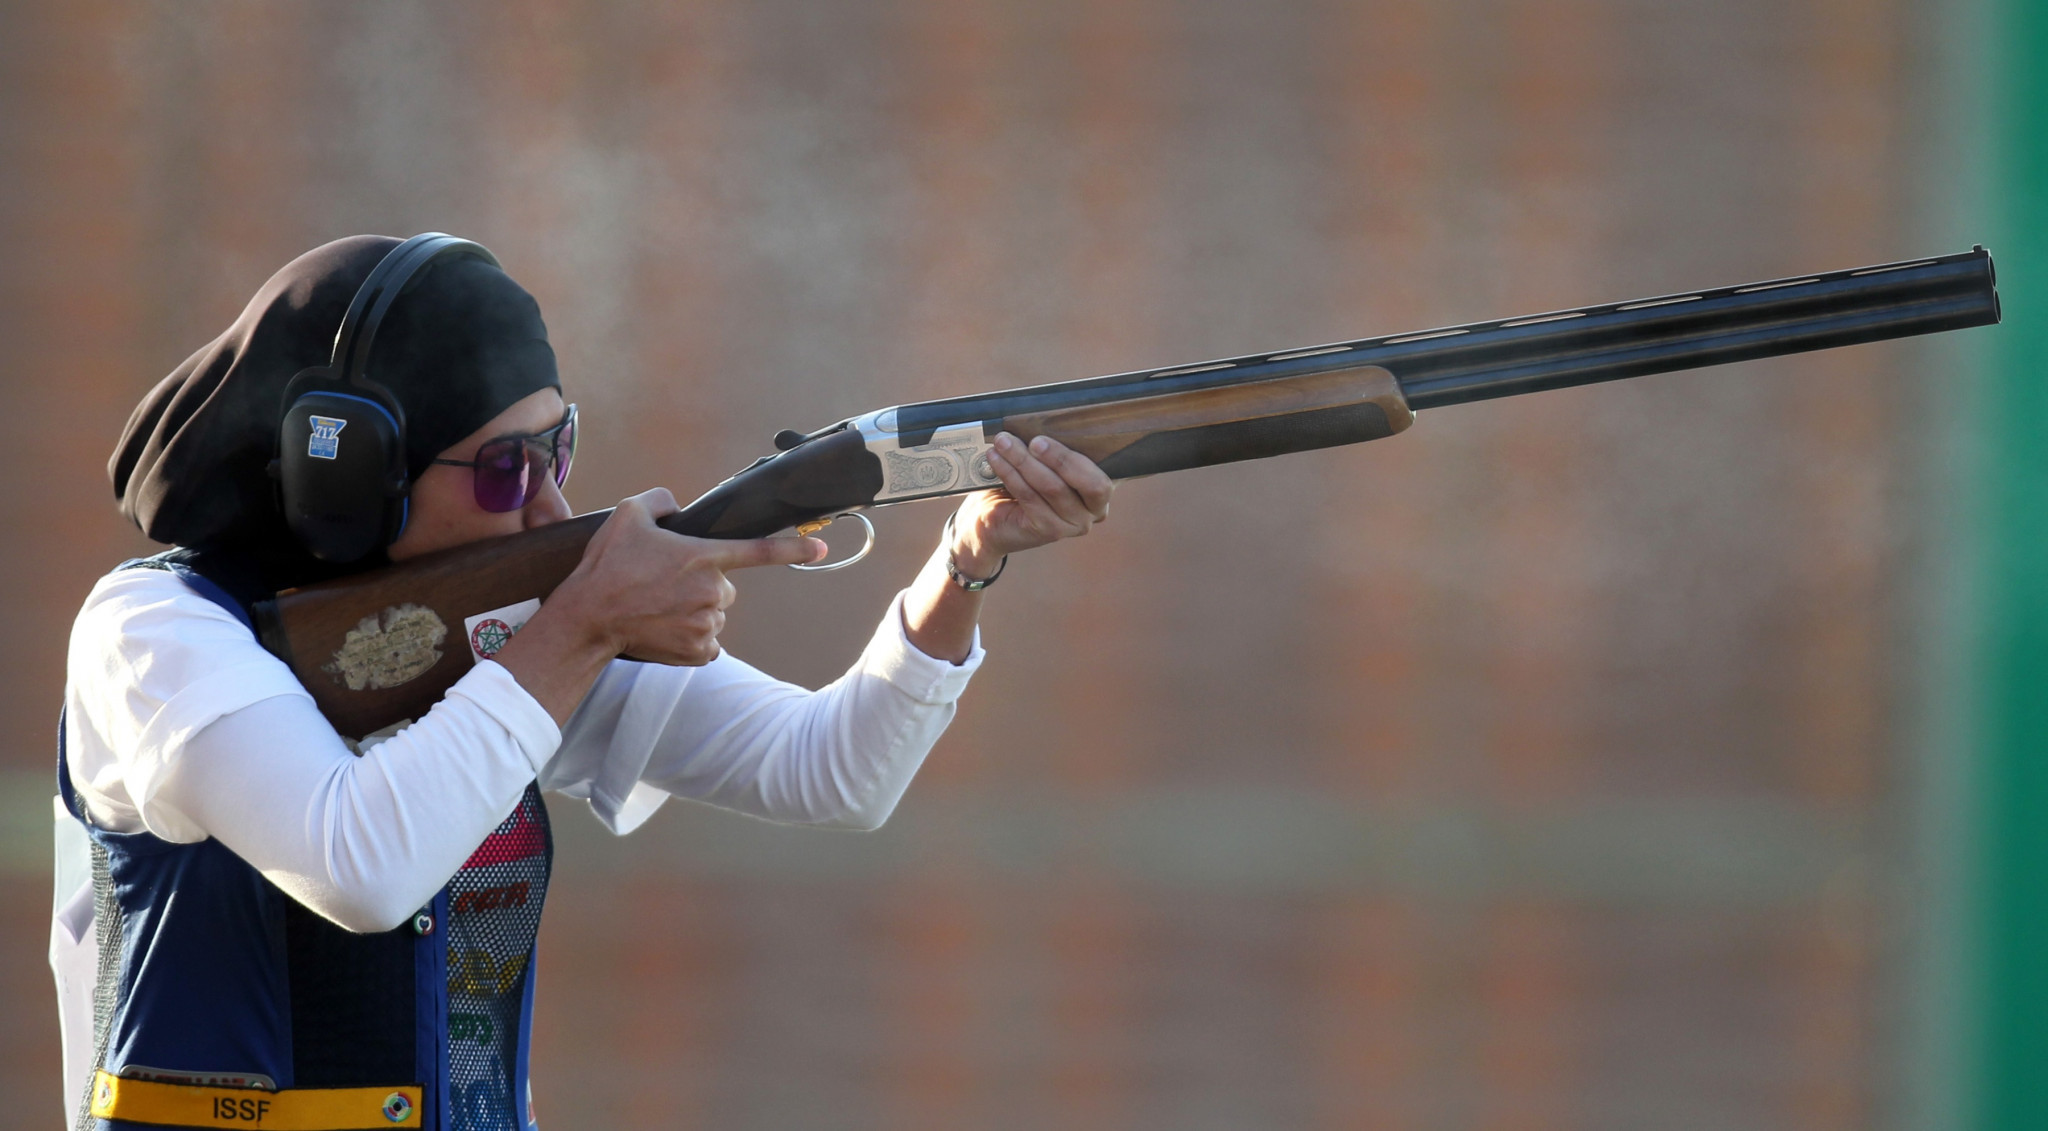 Kuwait shoot to top of medals table at ISSF Grand Prix in Konya